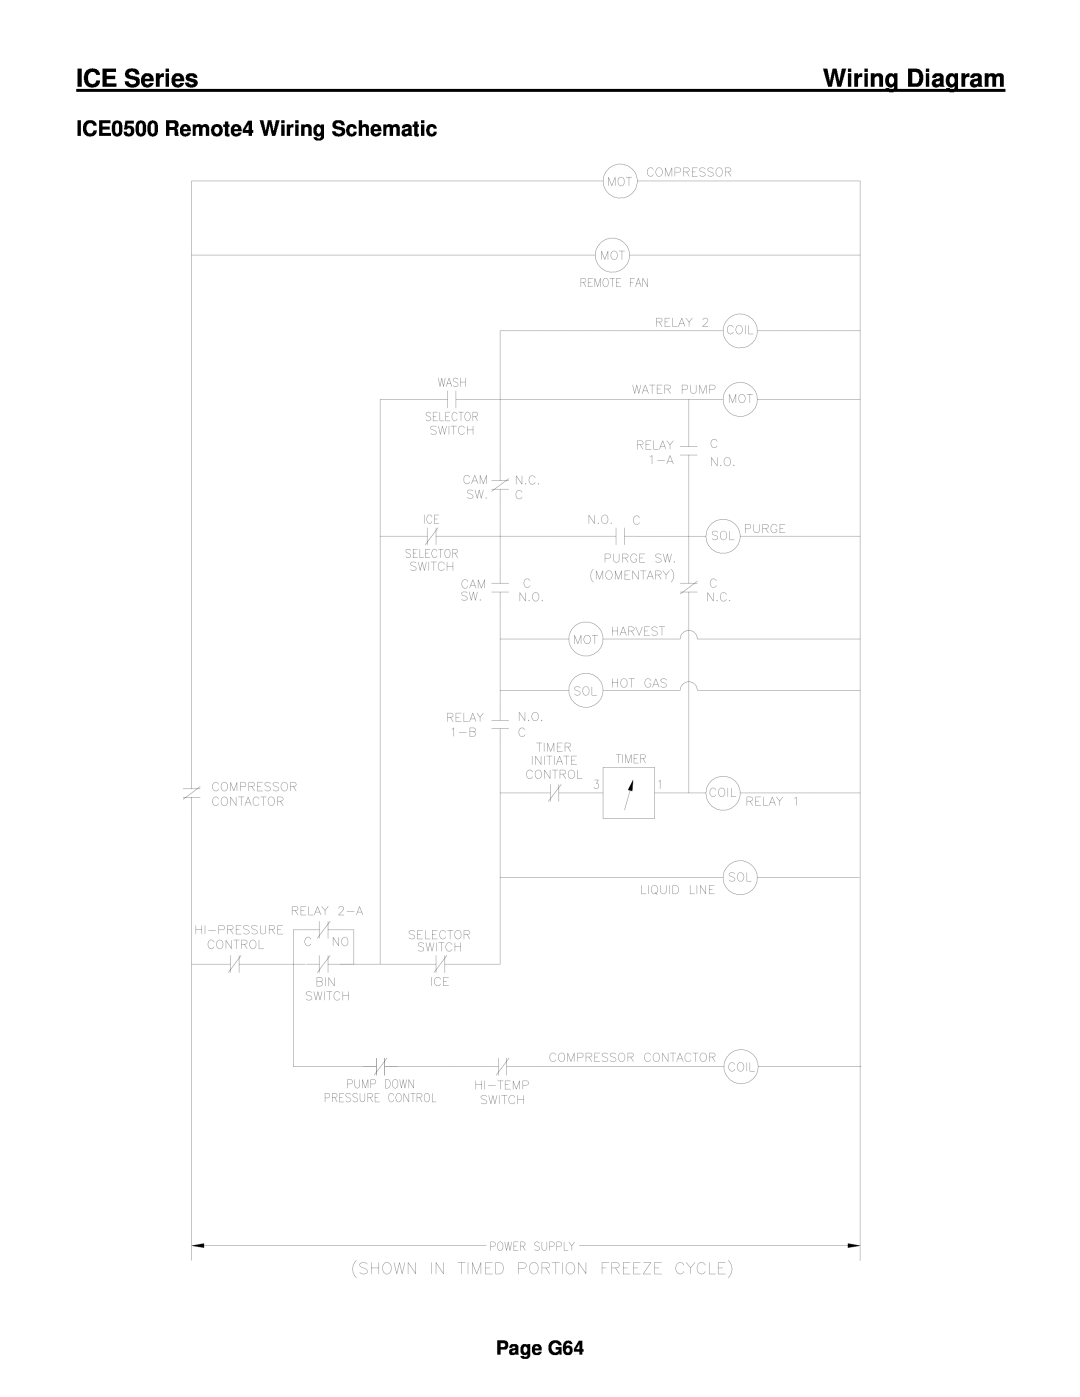 Ice-O-Matic ICE0250 Series installation manual ICE0500 Remote4 Wiring Schematic, ICE Series, Wiring Diagram, Page G64 